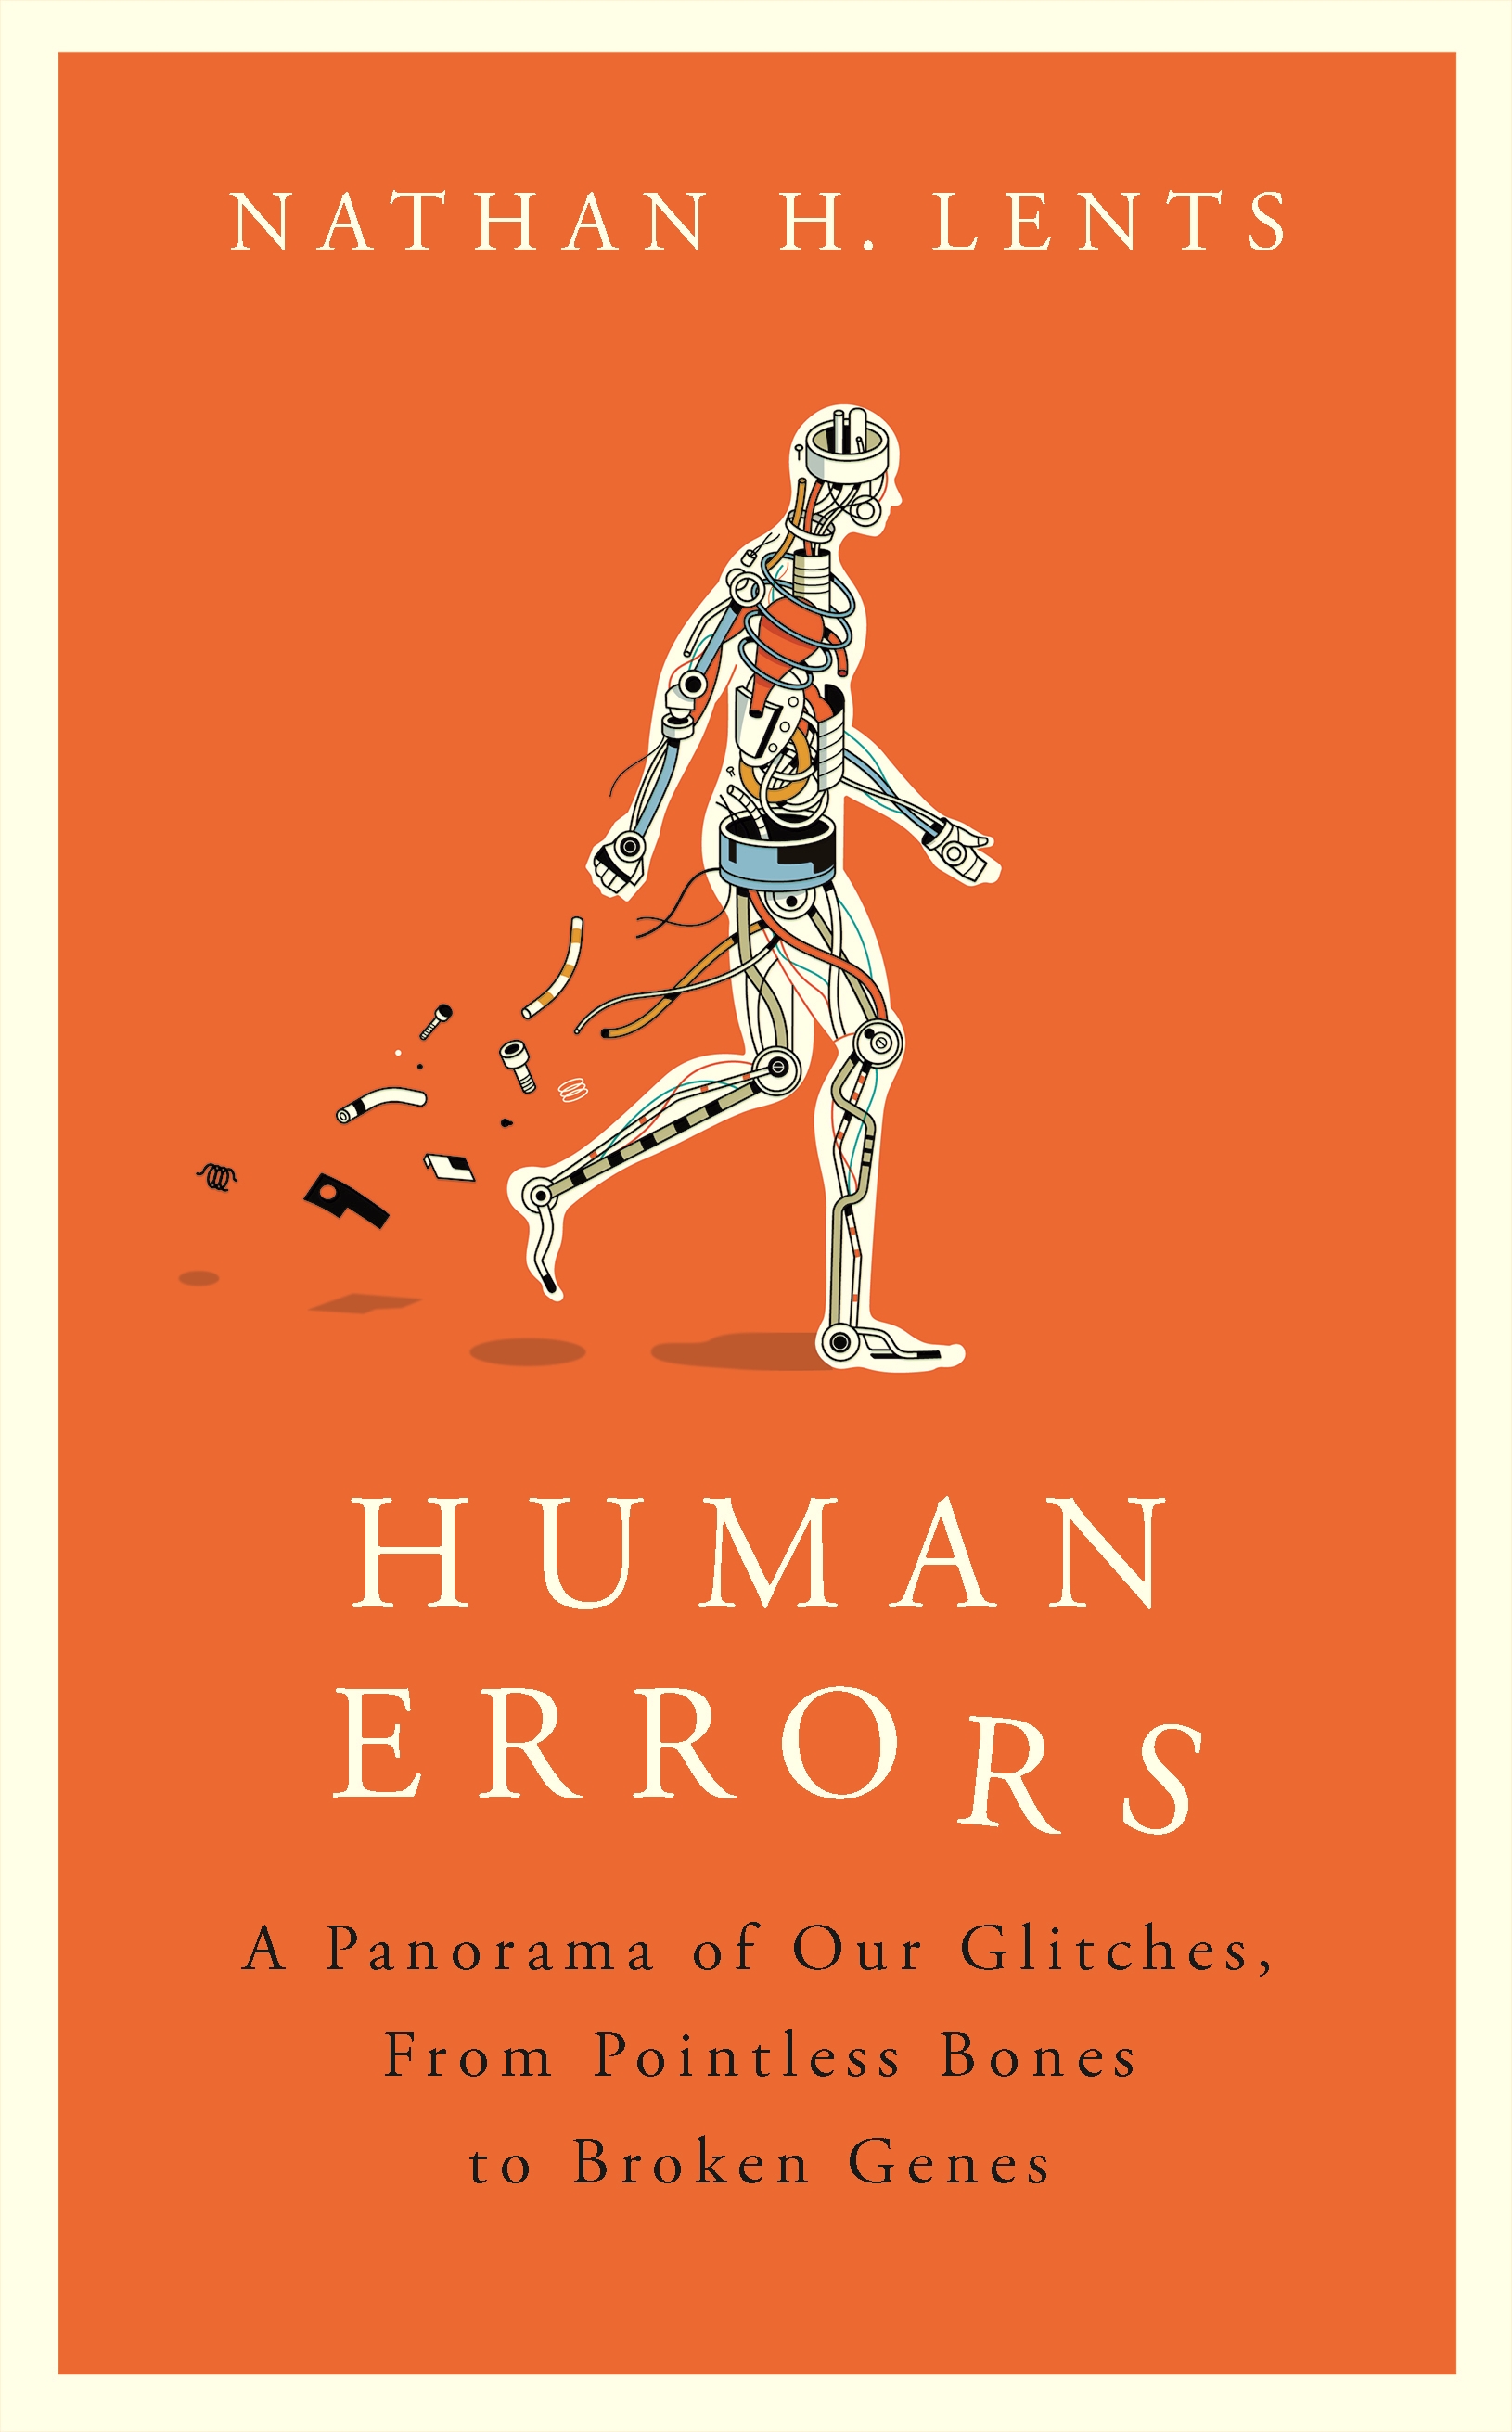 thought-provoking　since　Human　Nathan　Errors　Ground-breaking,　WN　by　Lents　1949　award-winning,　books